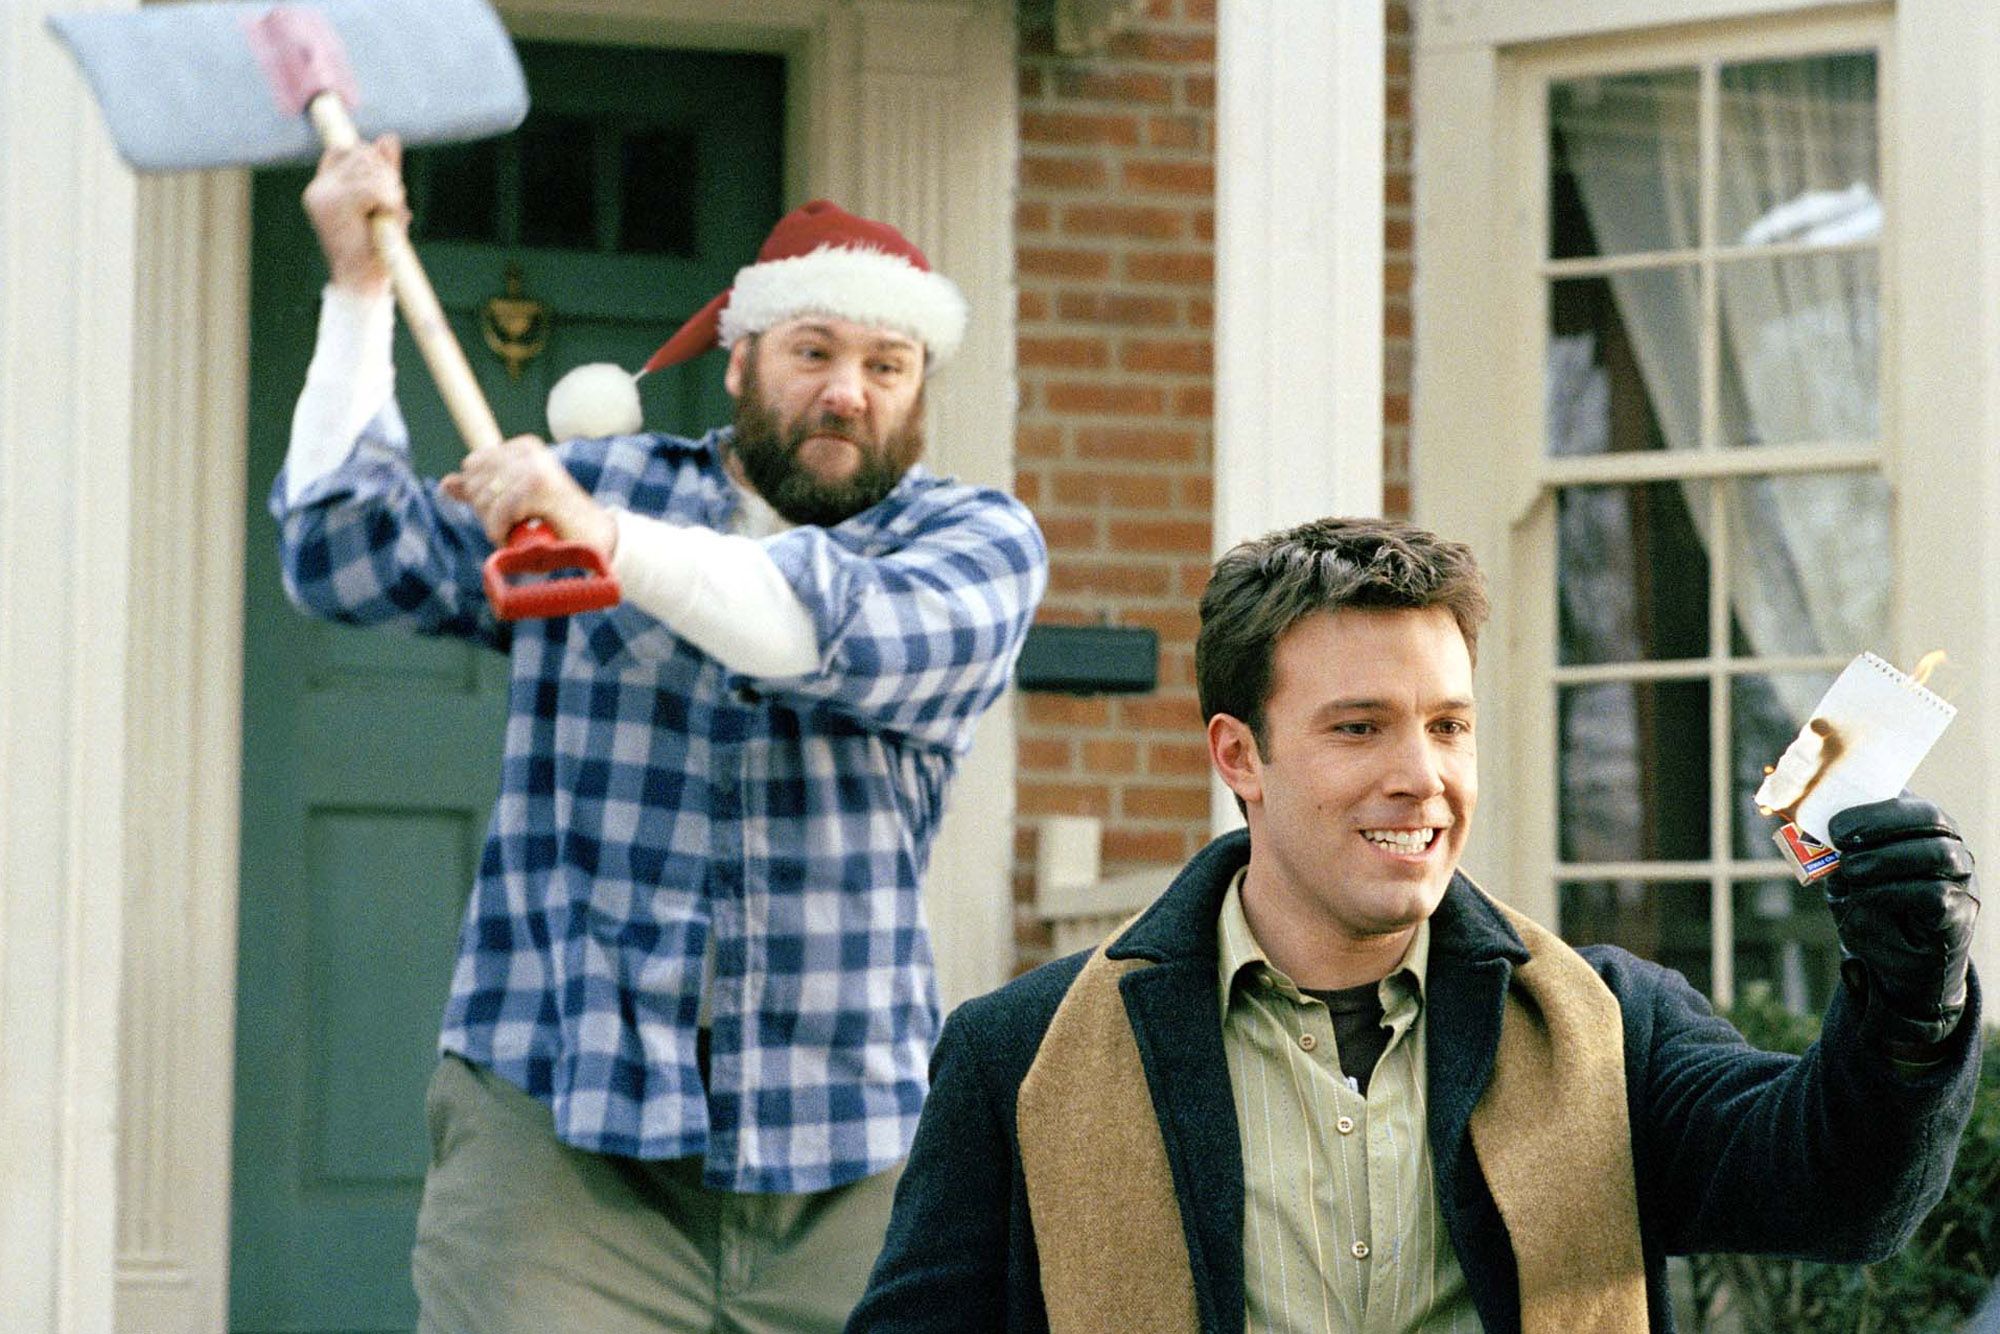 16 Celebs You Forgot Starred in Christmas Movies